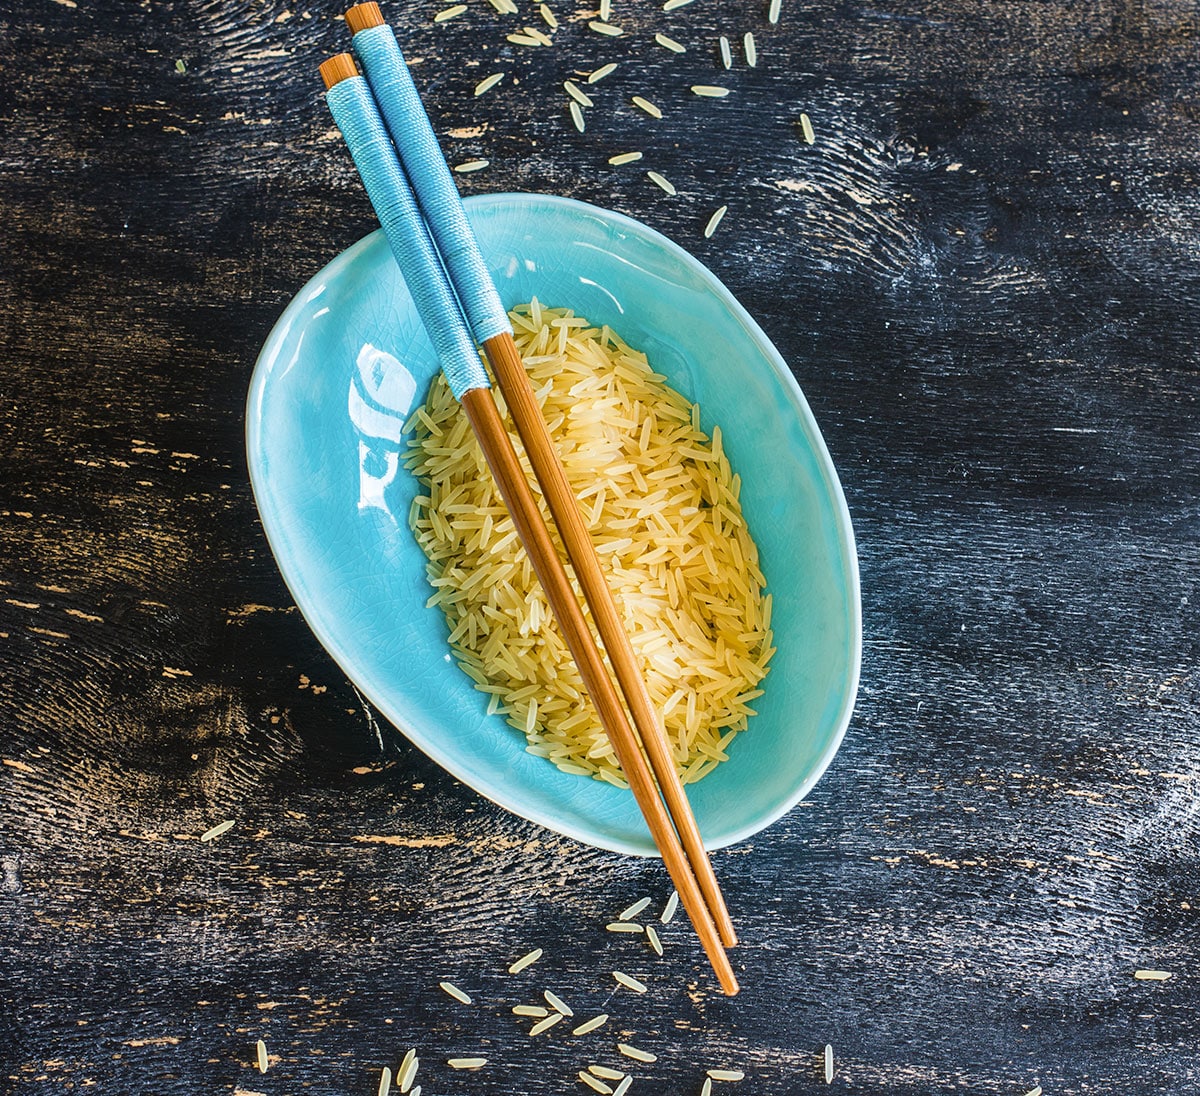 A bowl of rice and chopsticks on a wooden table.